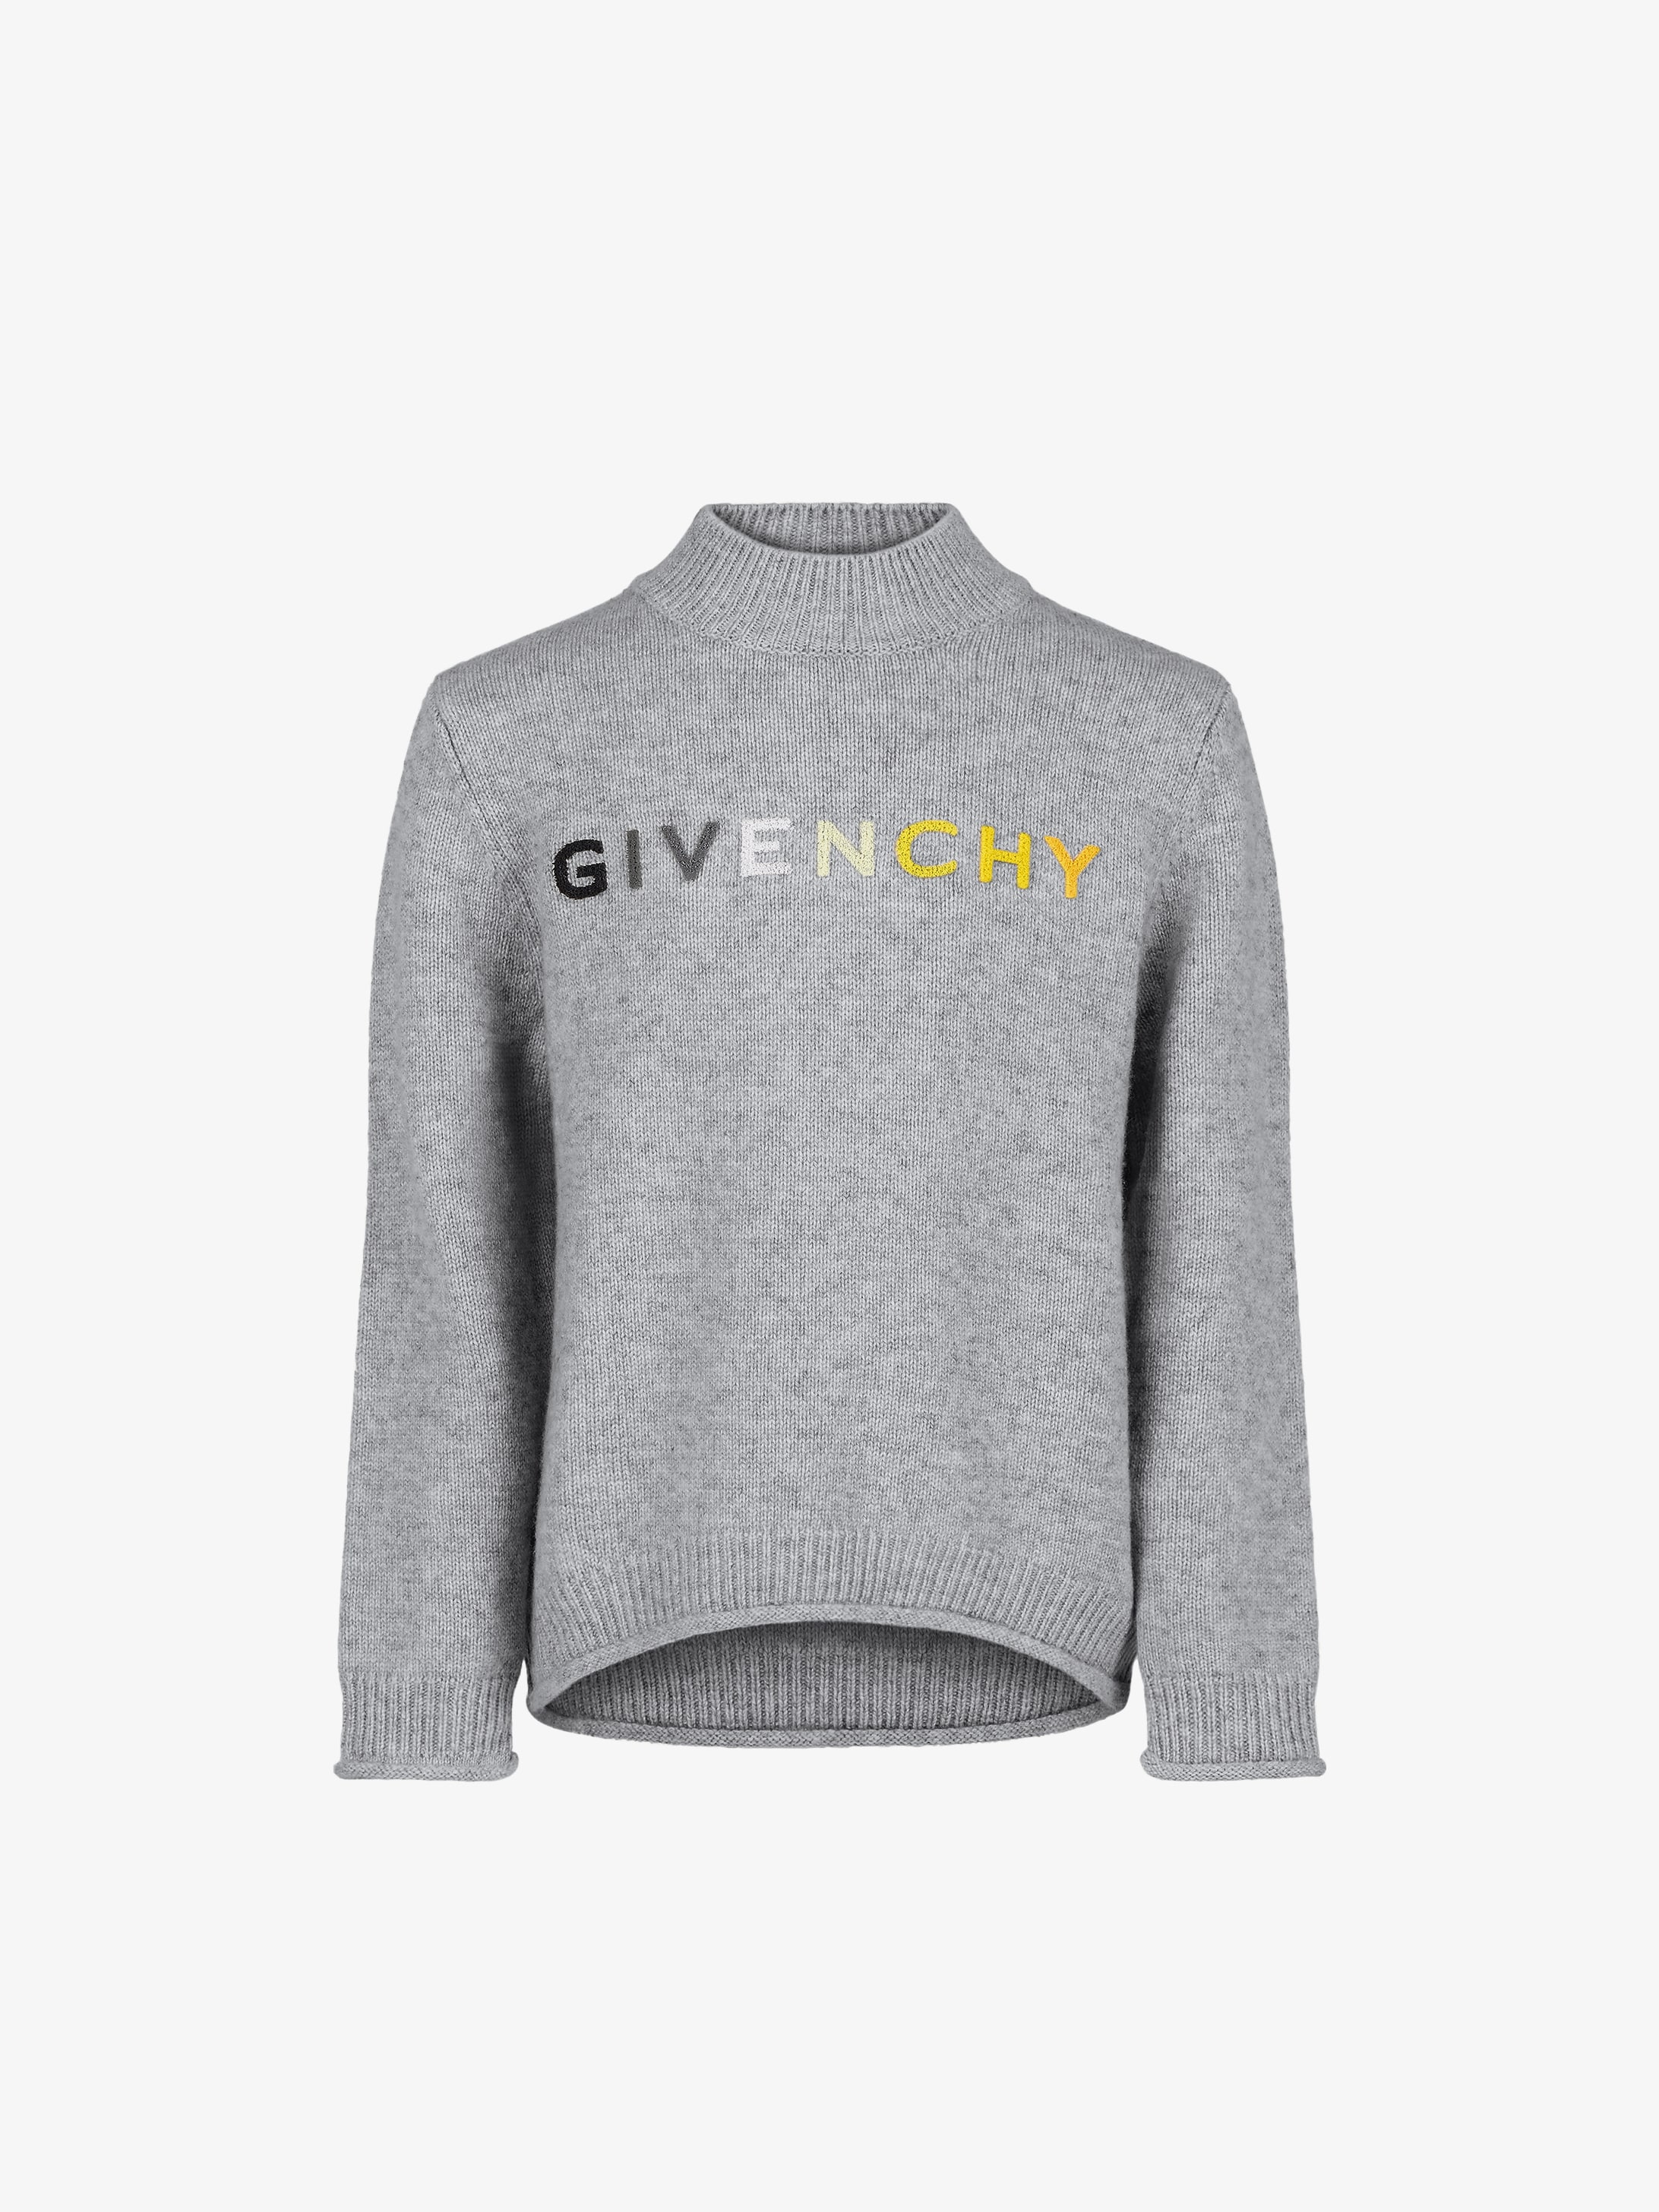 GIVENCHY sweater in wool and cashmere 